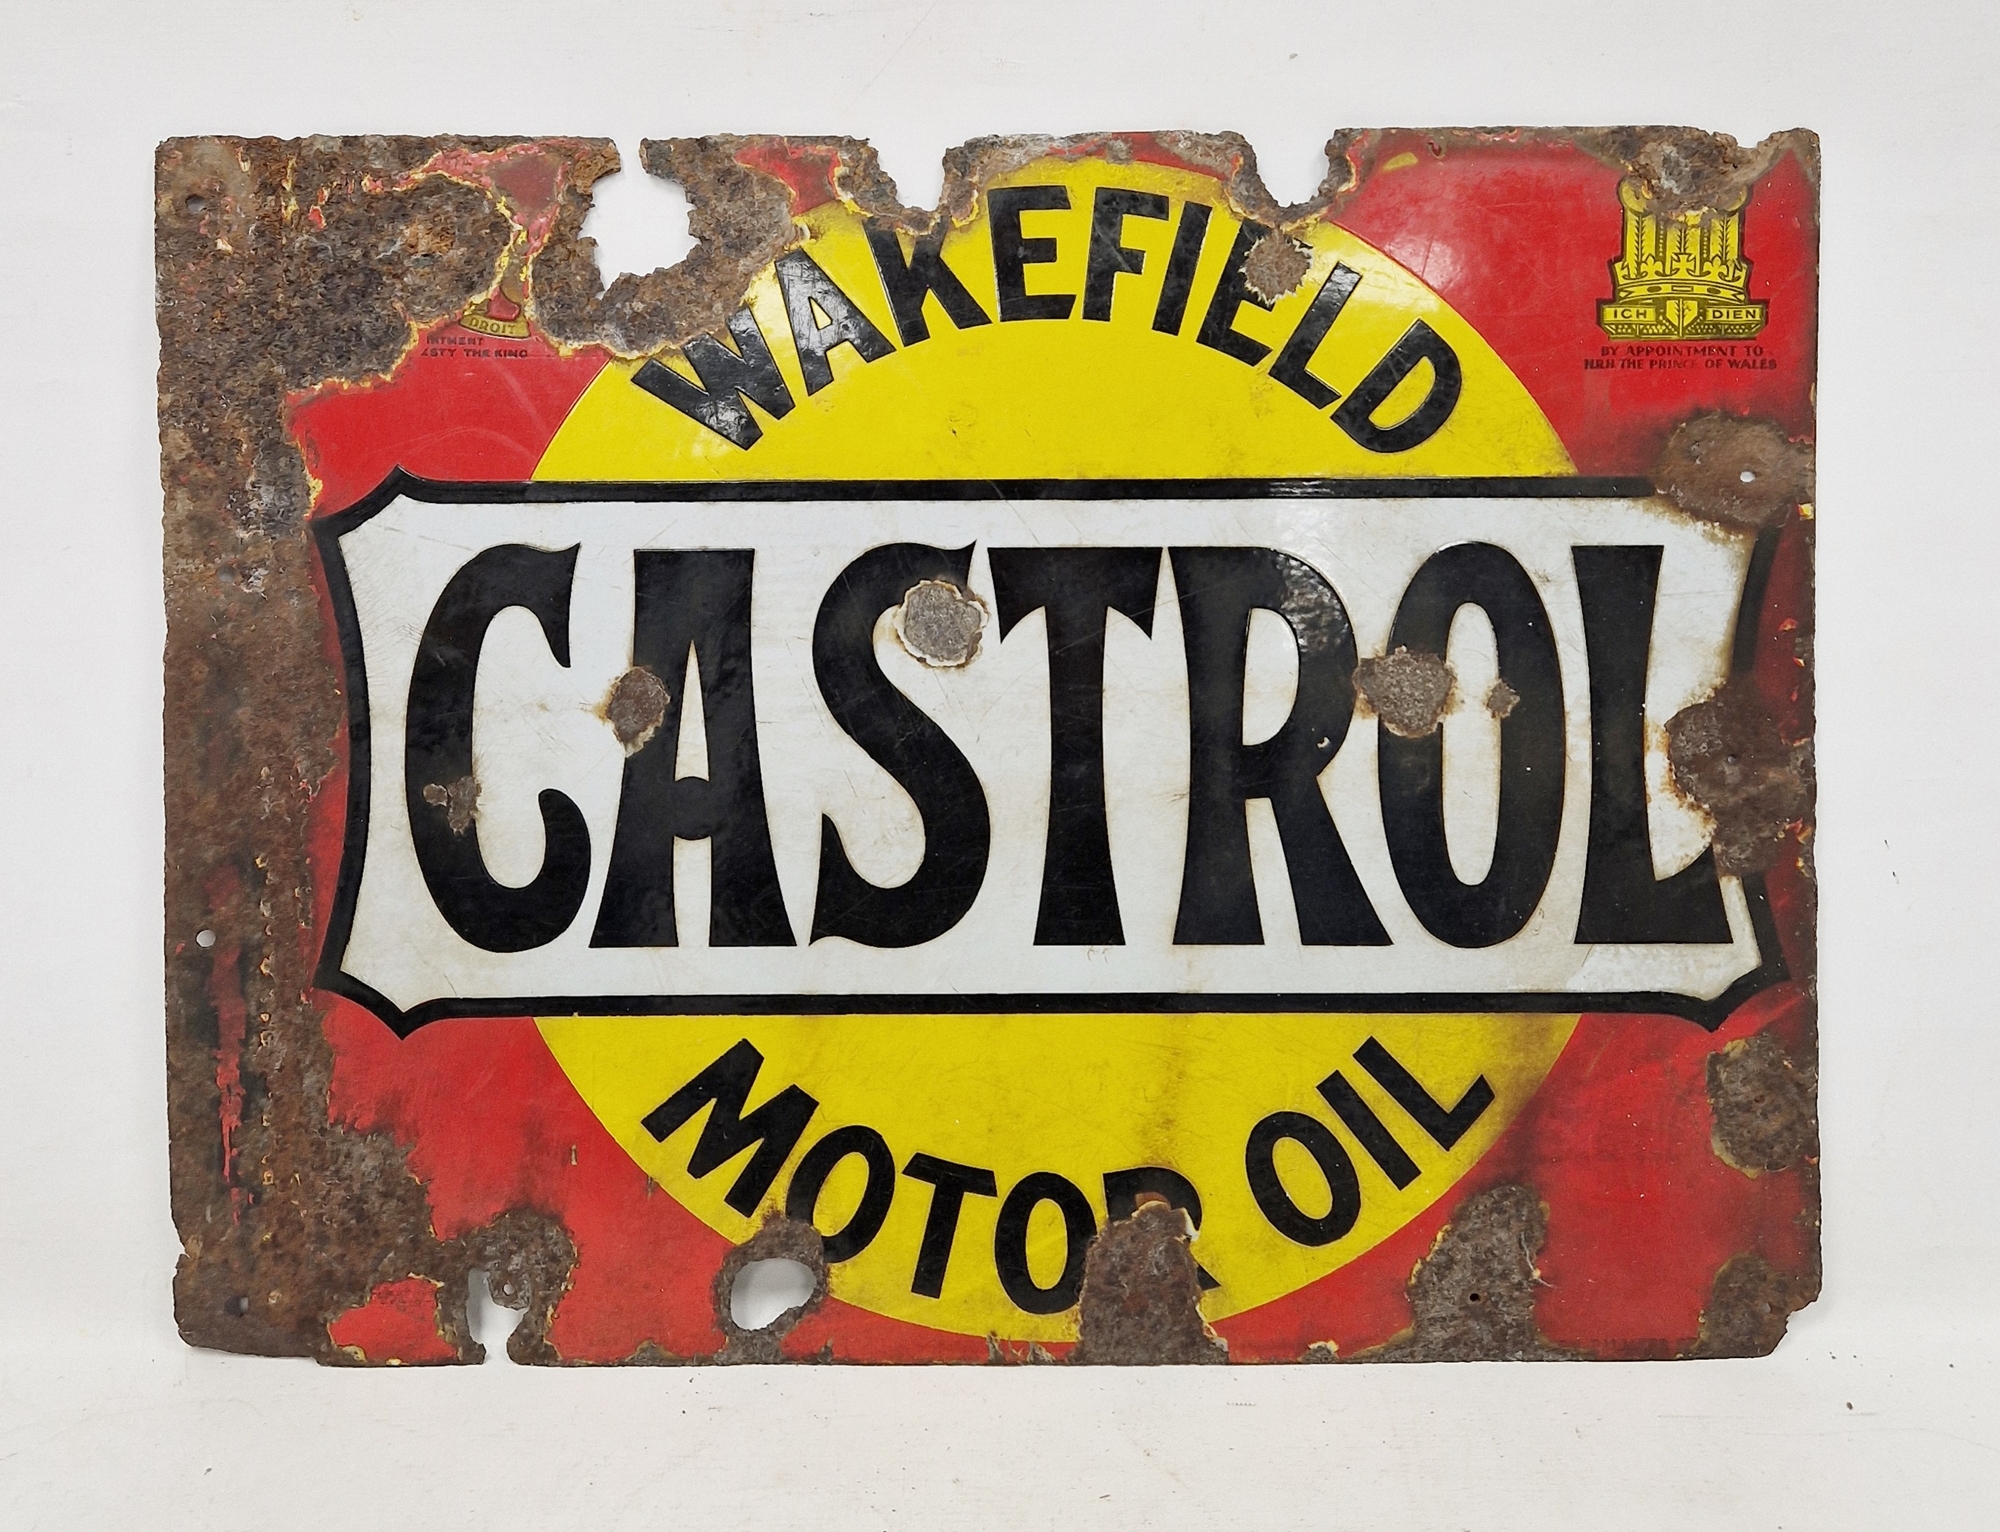 Vintage Wakefield Castrol Motor Oil double-sided enamelled advertising sign, of rectangular form, - Image 2 of 2